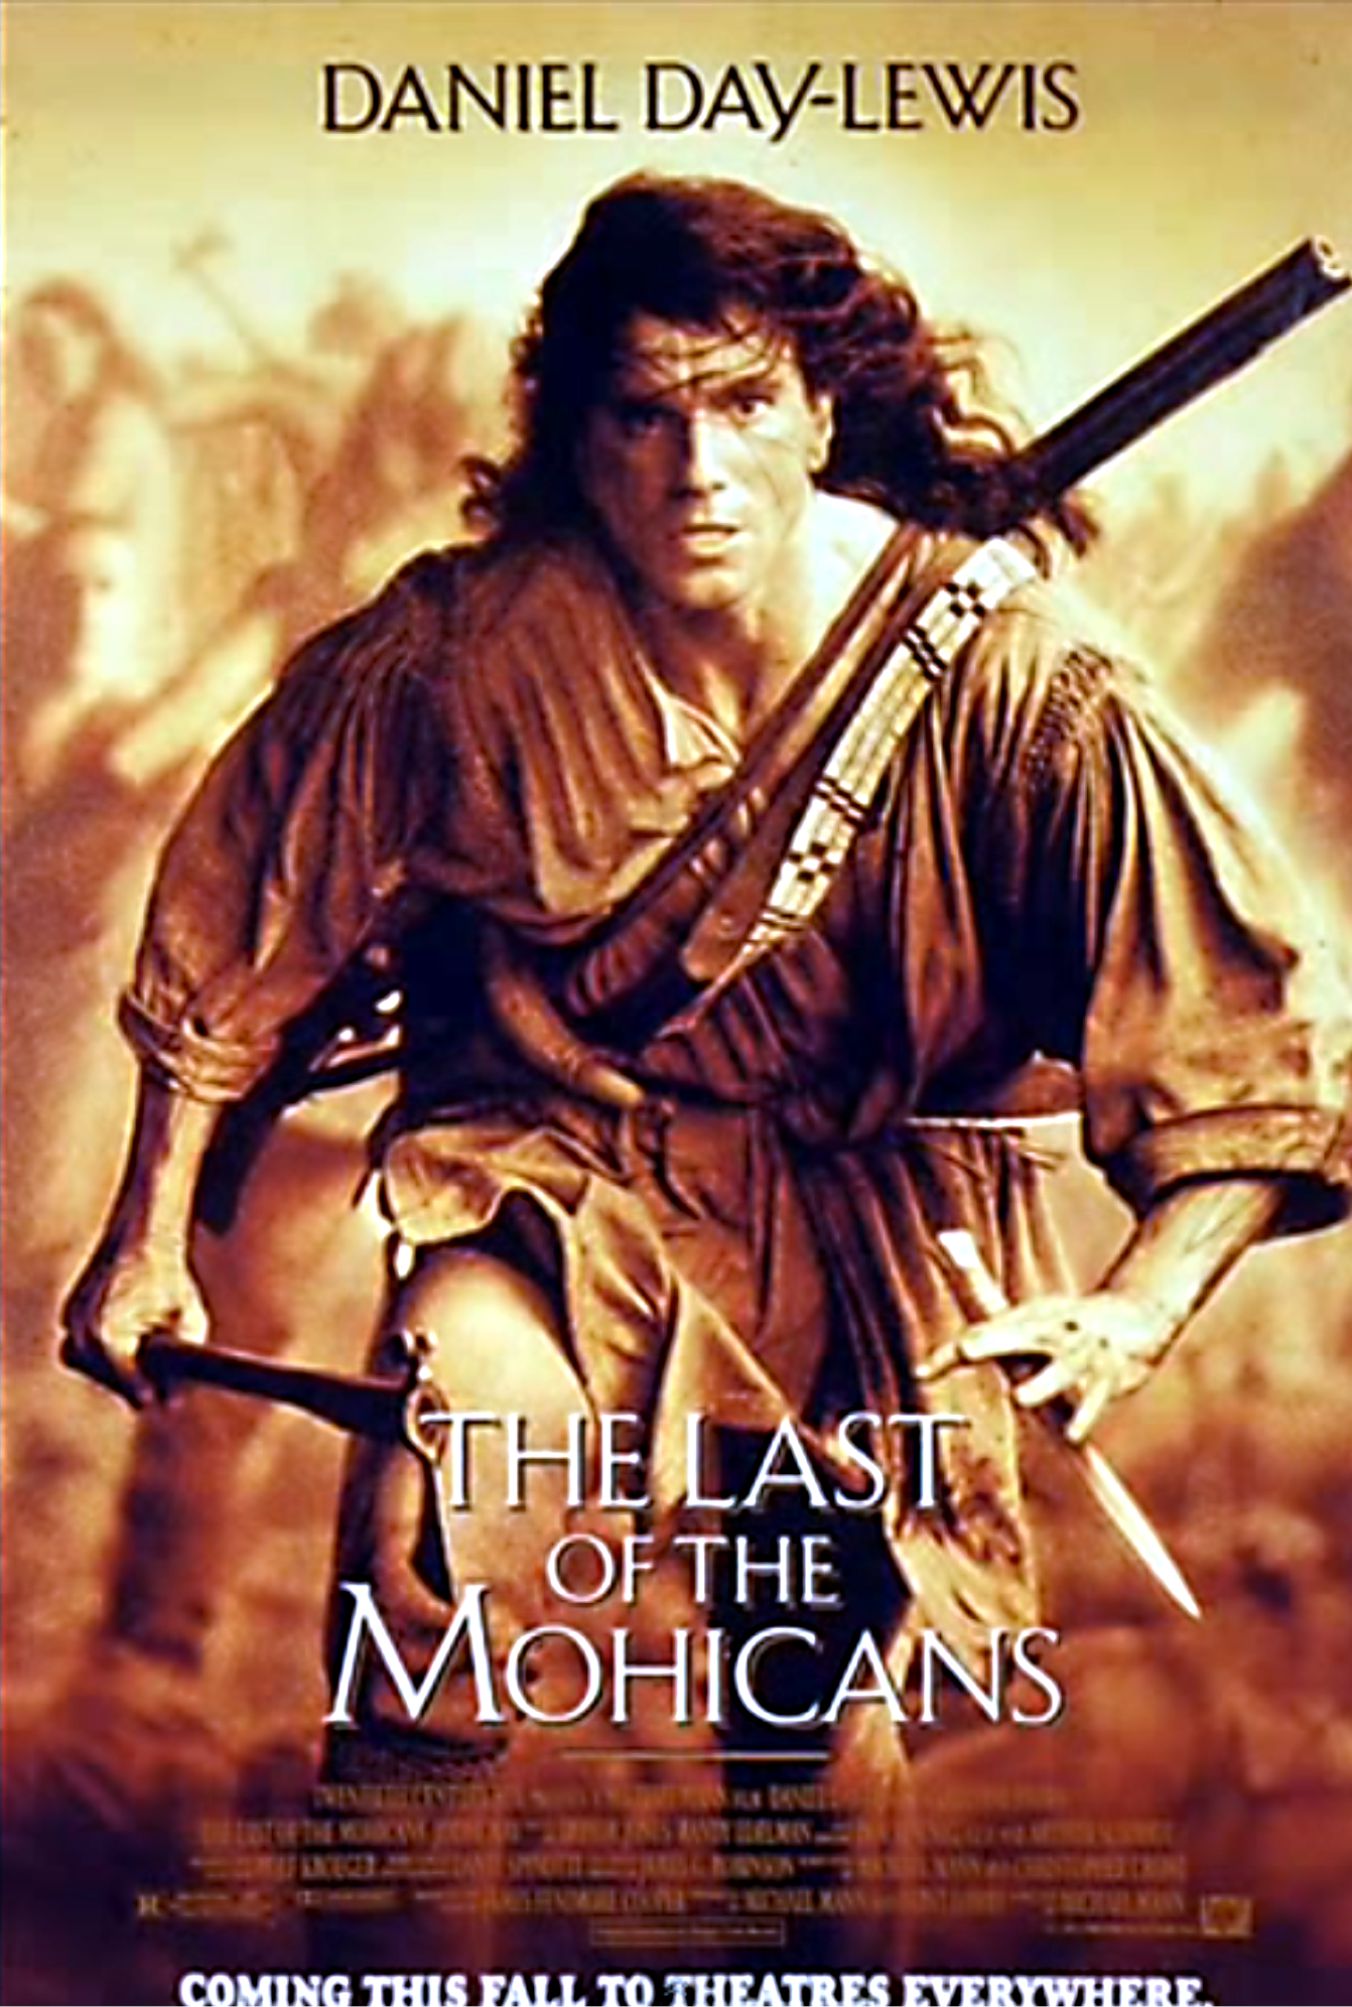 The Last of the Mohicans original poster